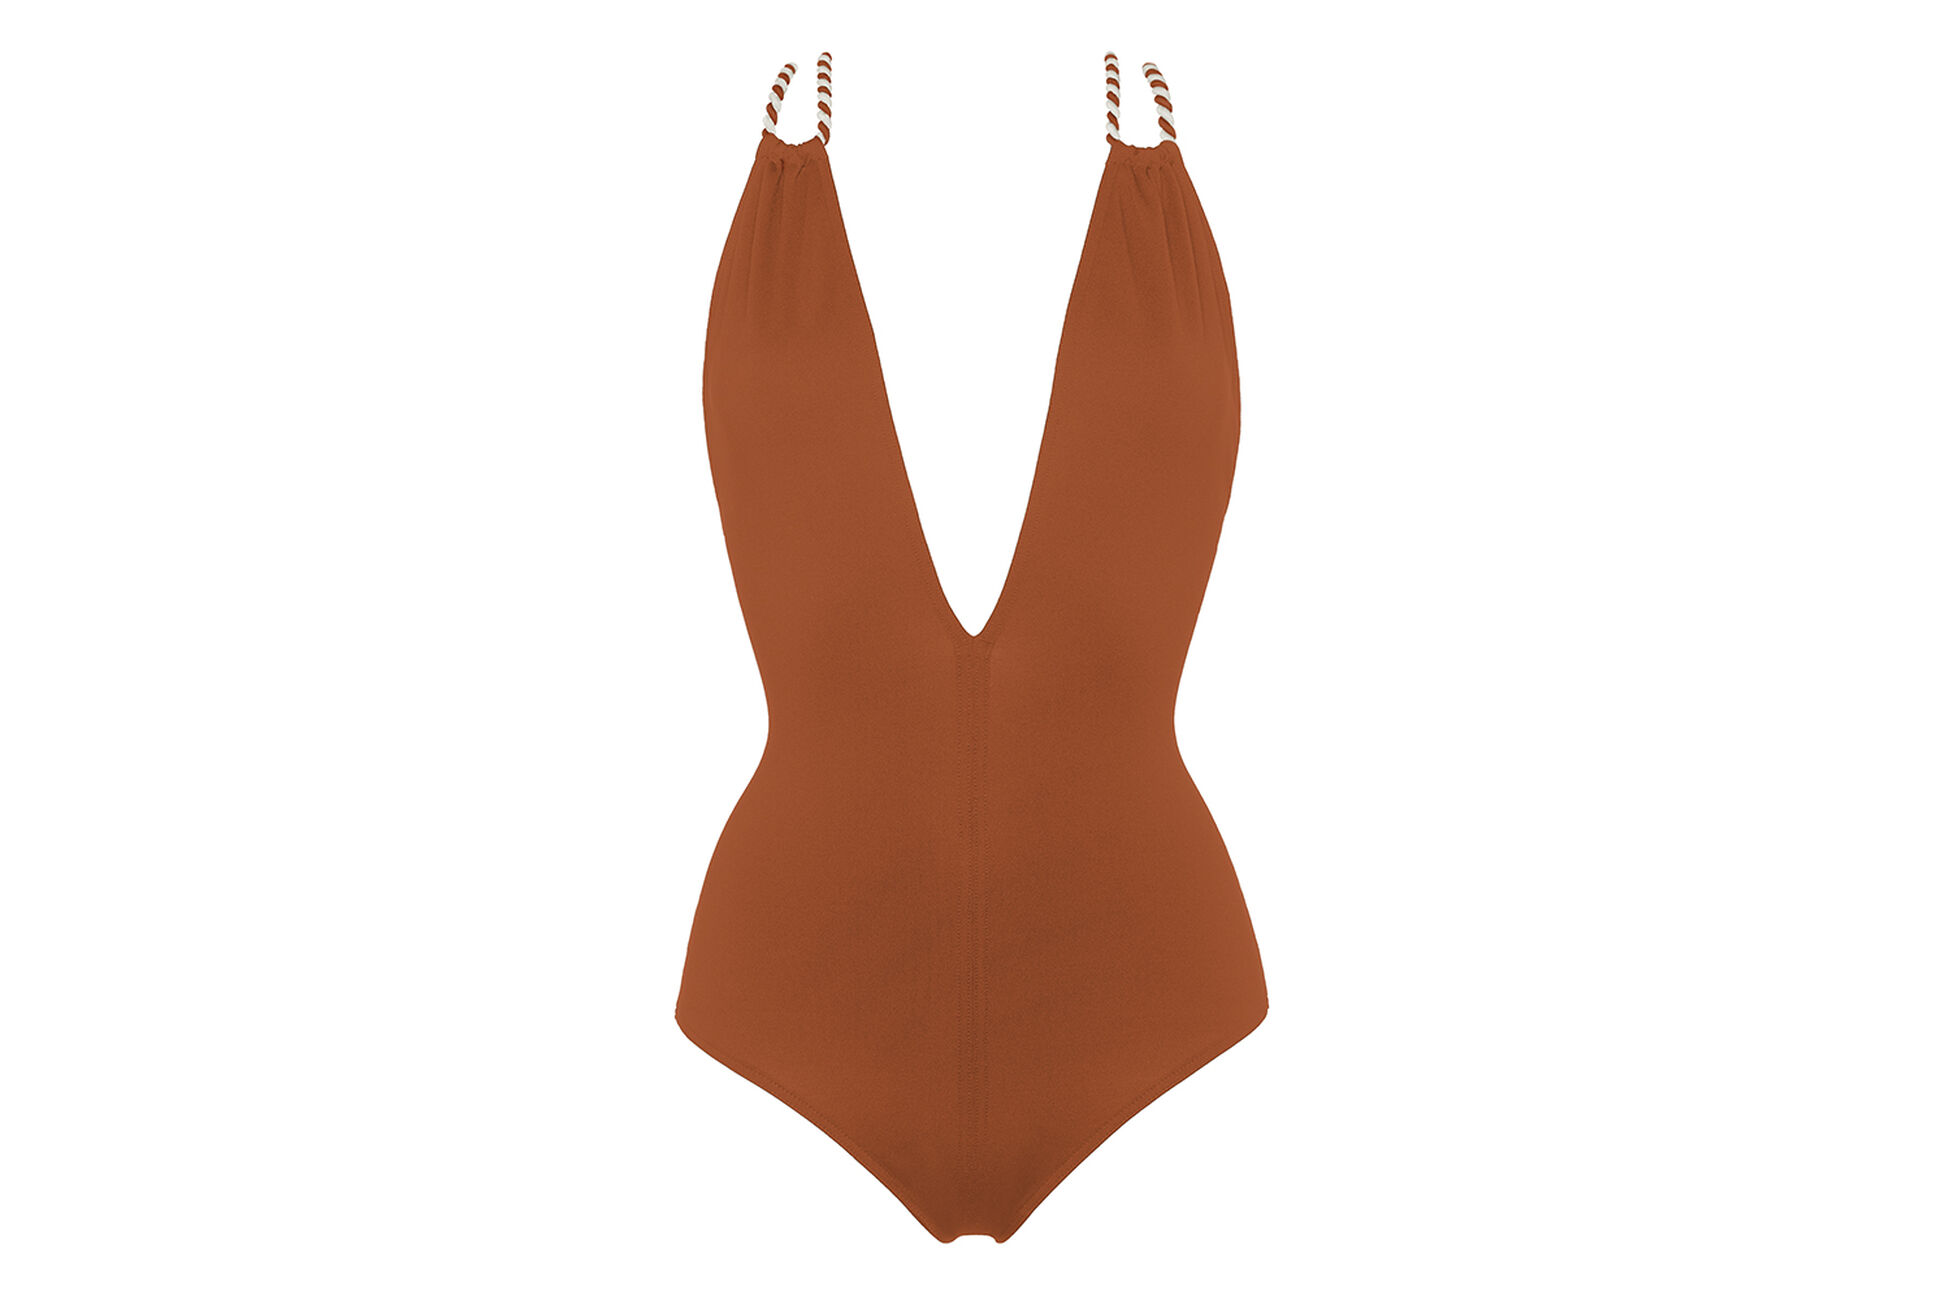 Pirouette Sophisticated one-piece standard view NaN